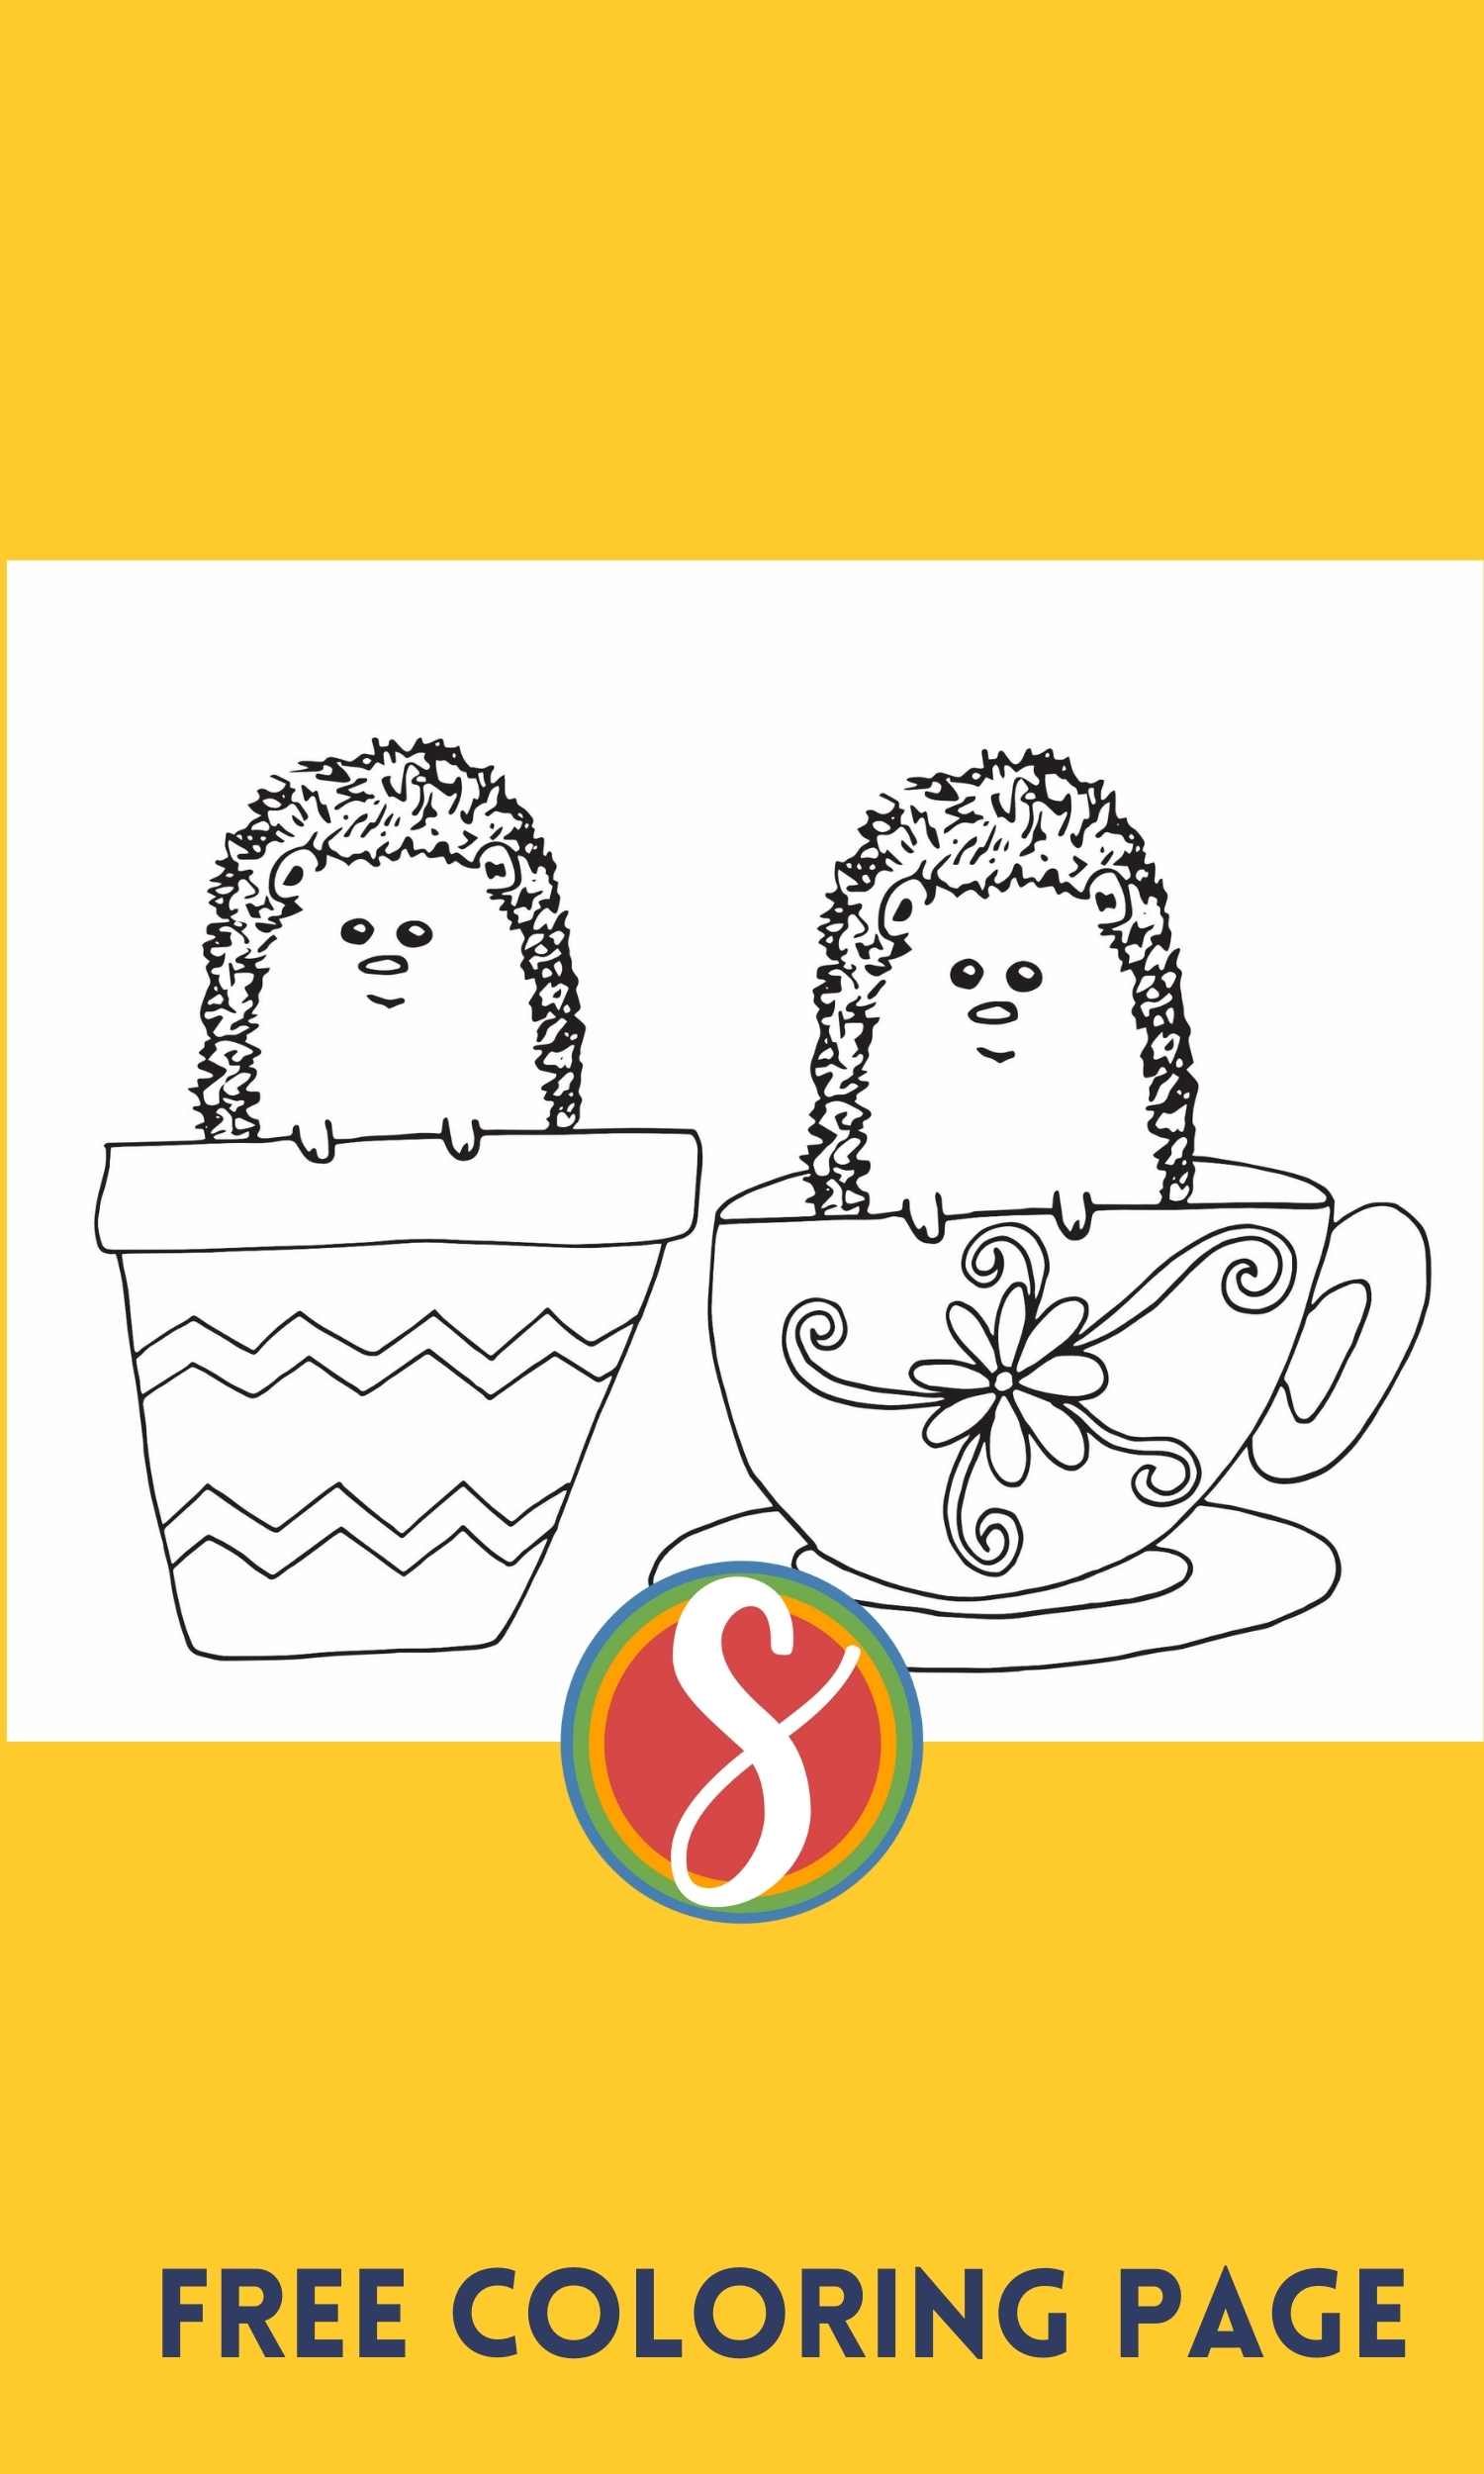 2 hedgehogs coloring page, one drawn in a teacup and one drawn inside a planter